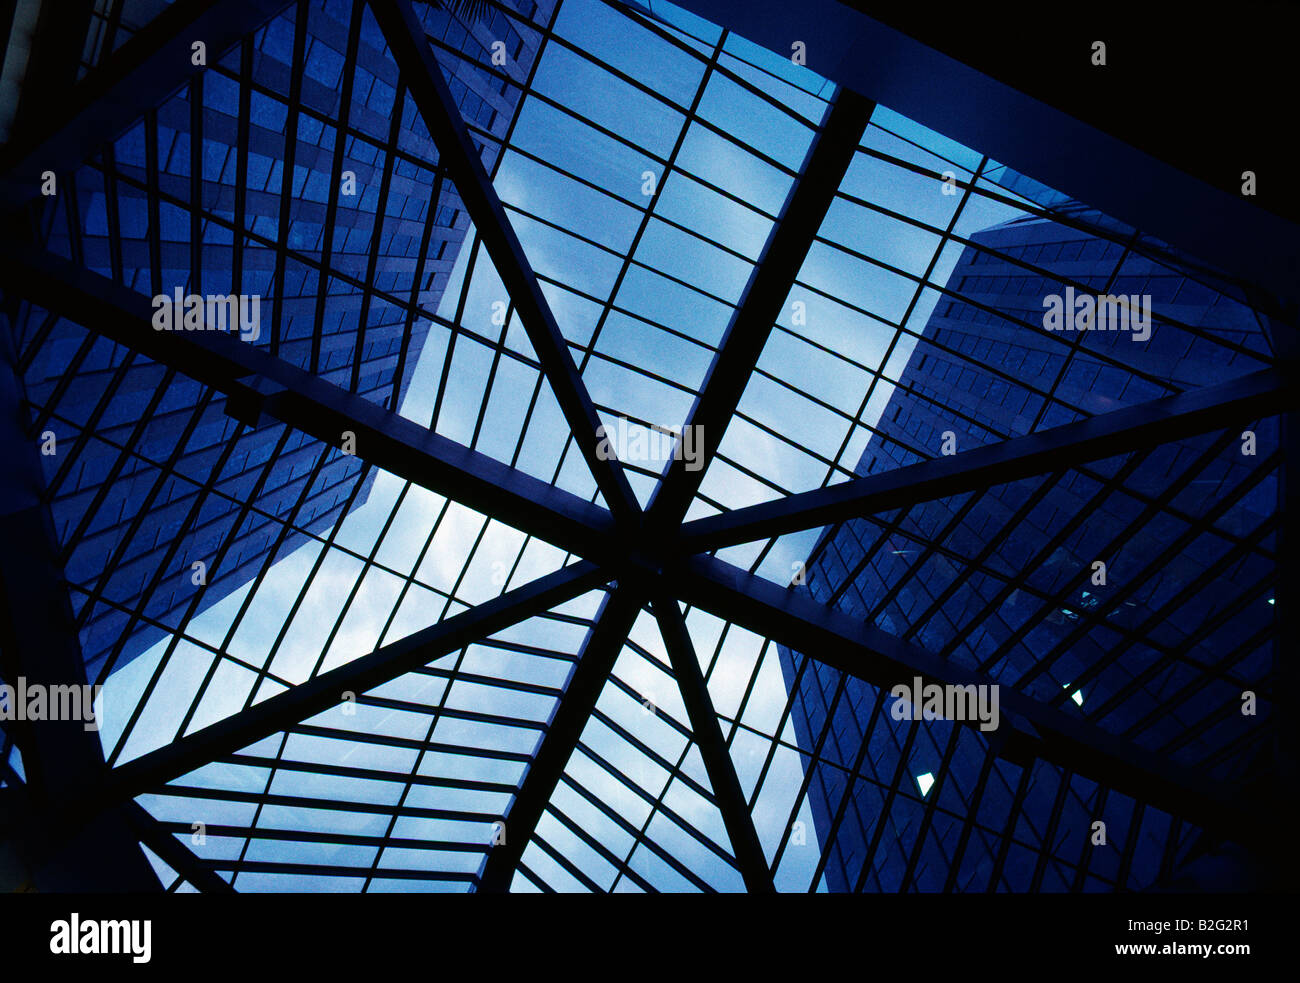 Concept Glass Ceiling Stock Photos Concept Glass Ceiling Stock